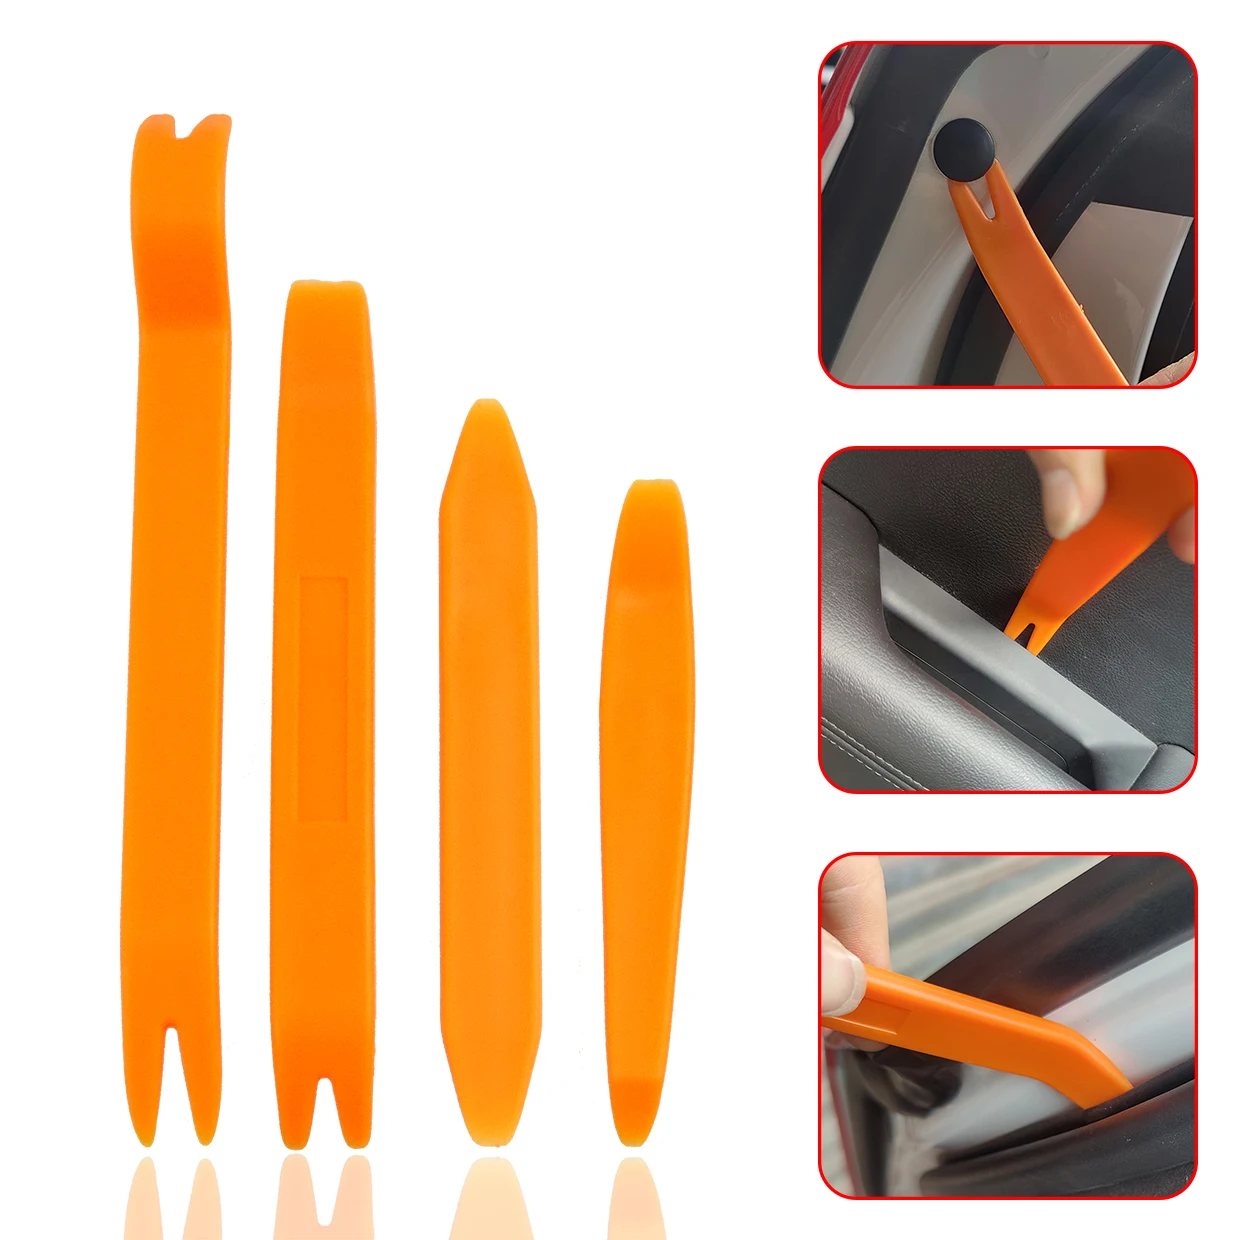 

Car styling Audio door removal tool For MAXUS G10 PLUS EG10 V80 D90 G50 D60 G20 T60 T70 car Accessories